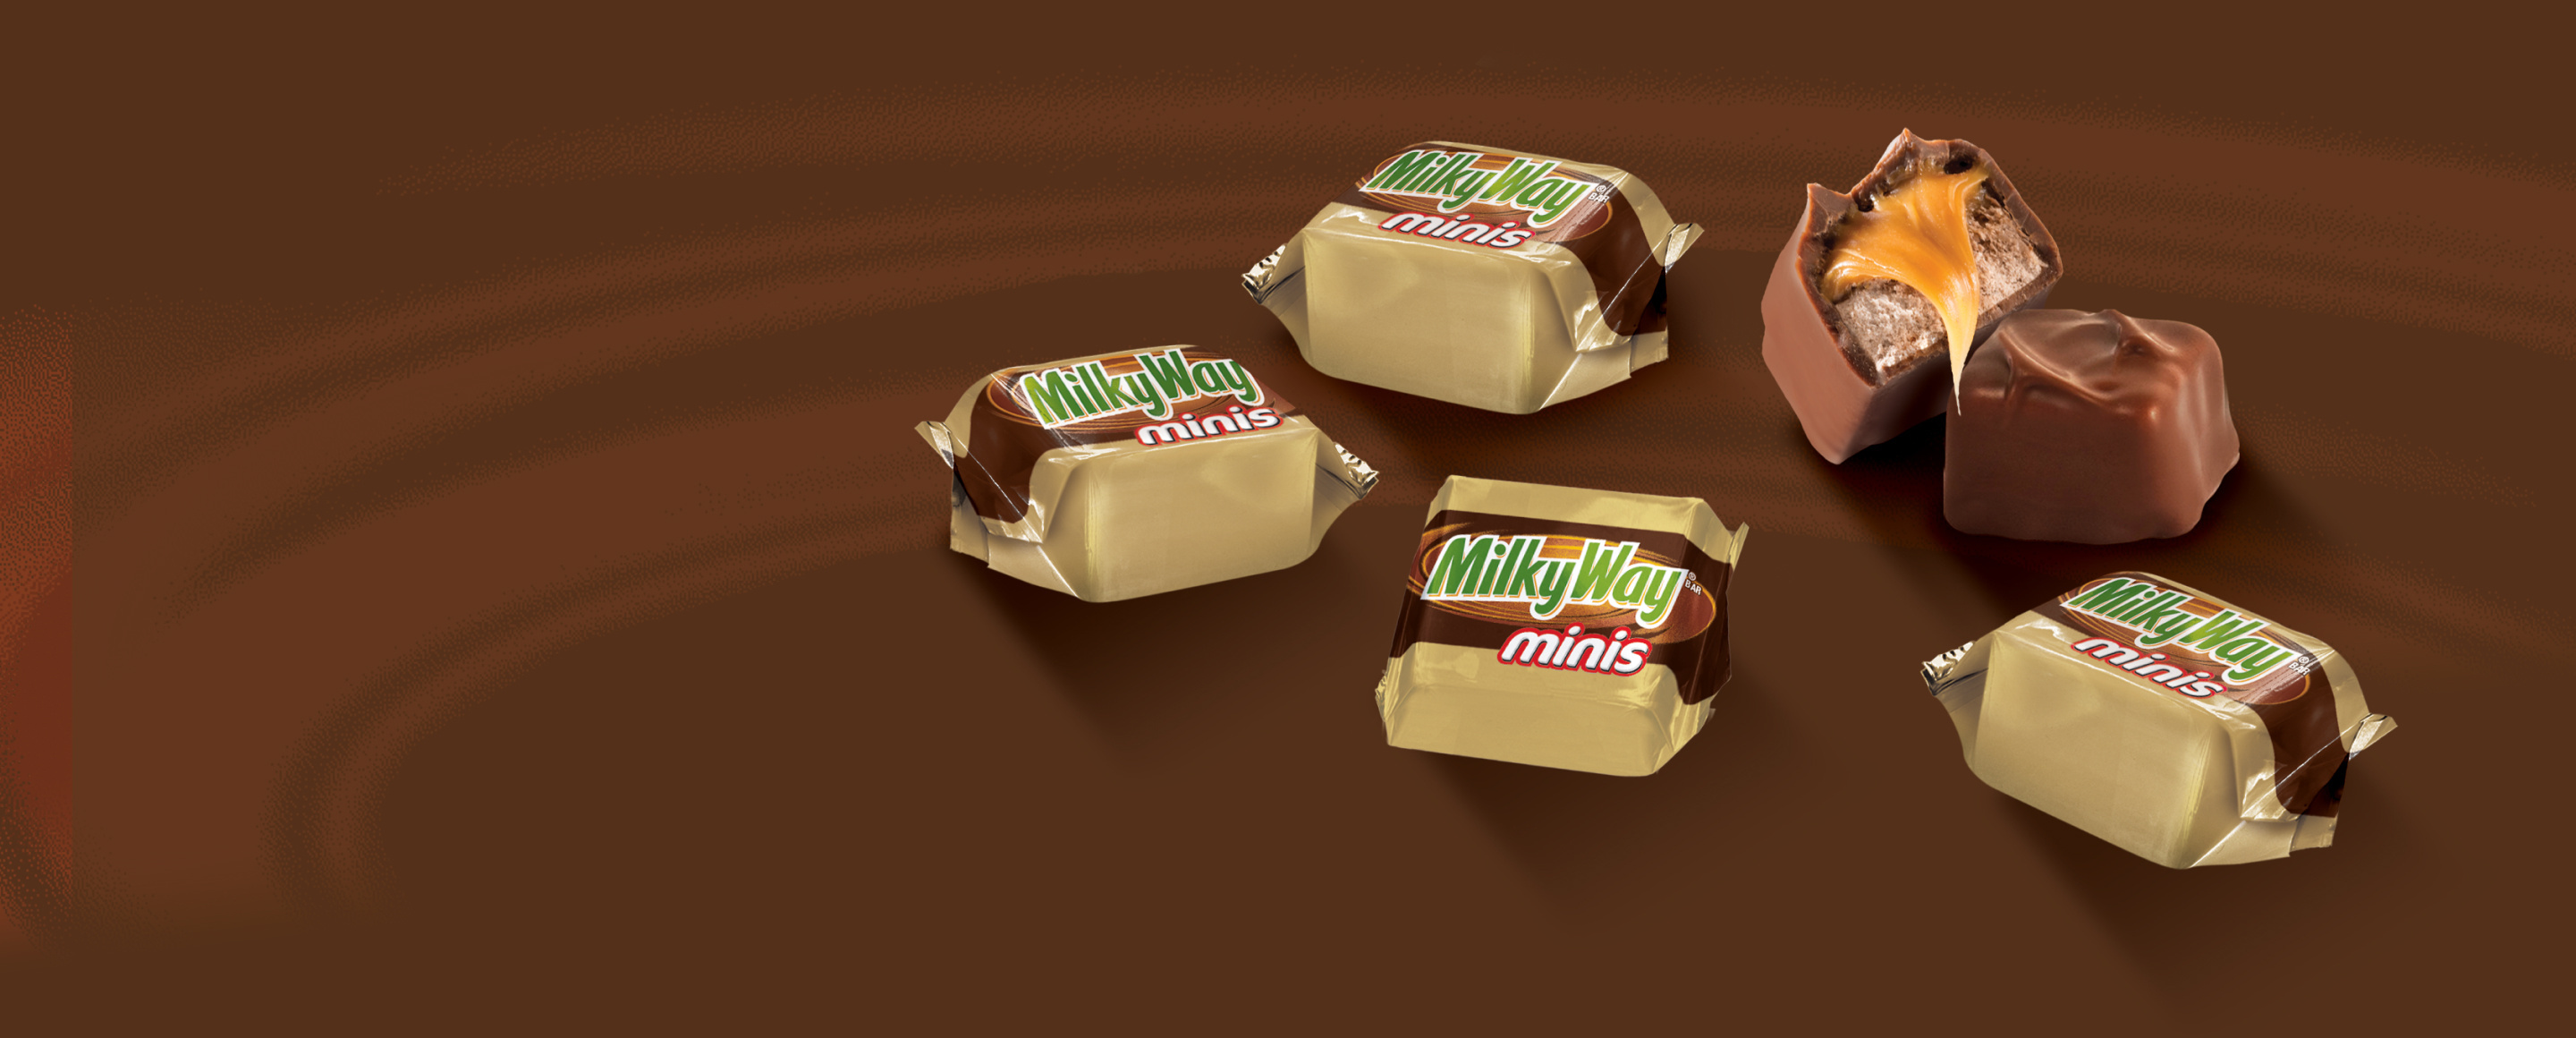 Four packaged and one opened Milkyway mini chocolate bars on brown background